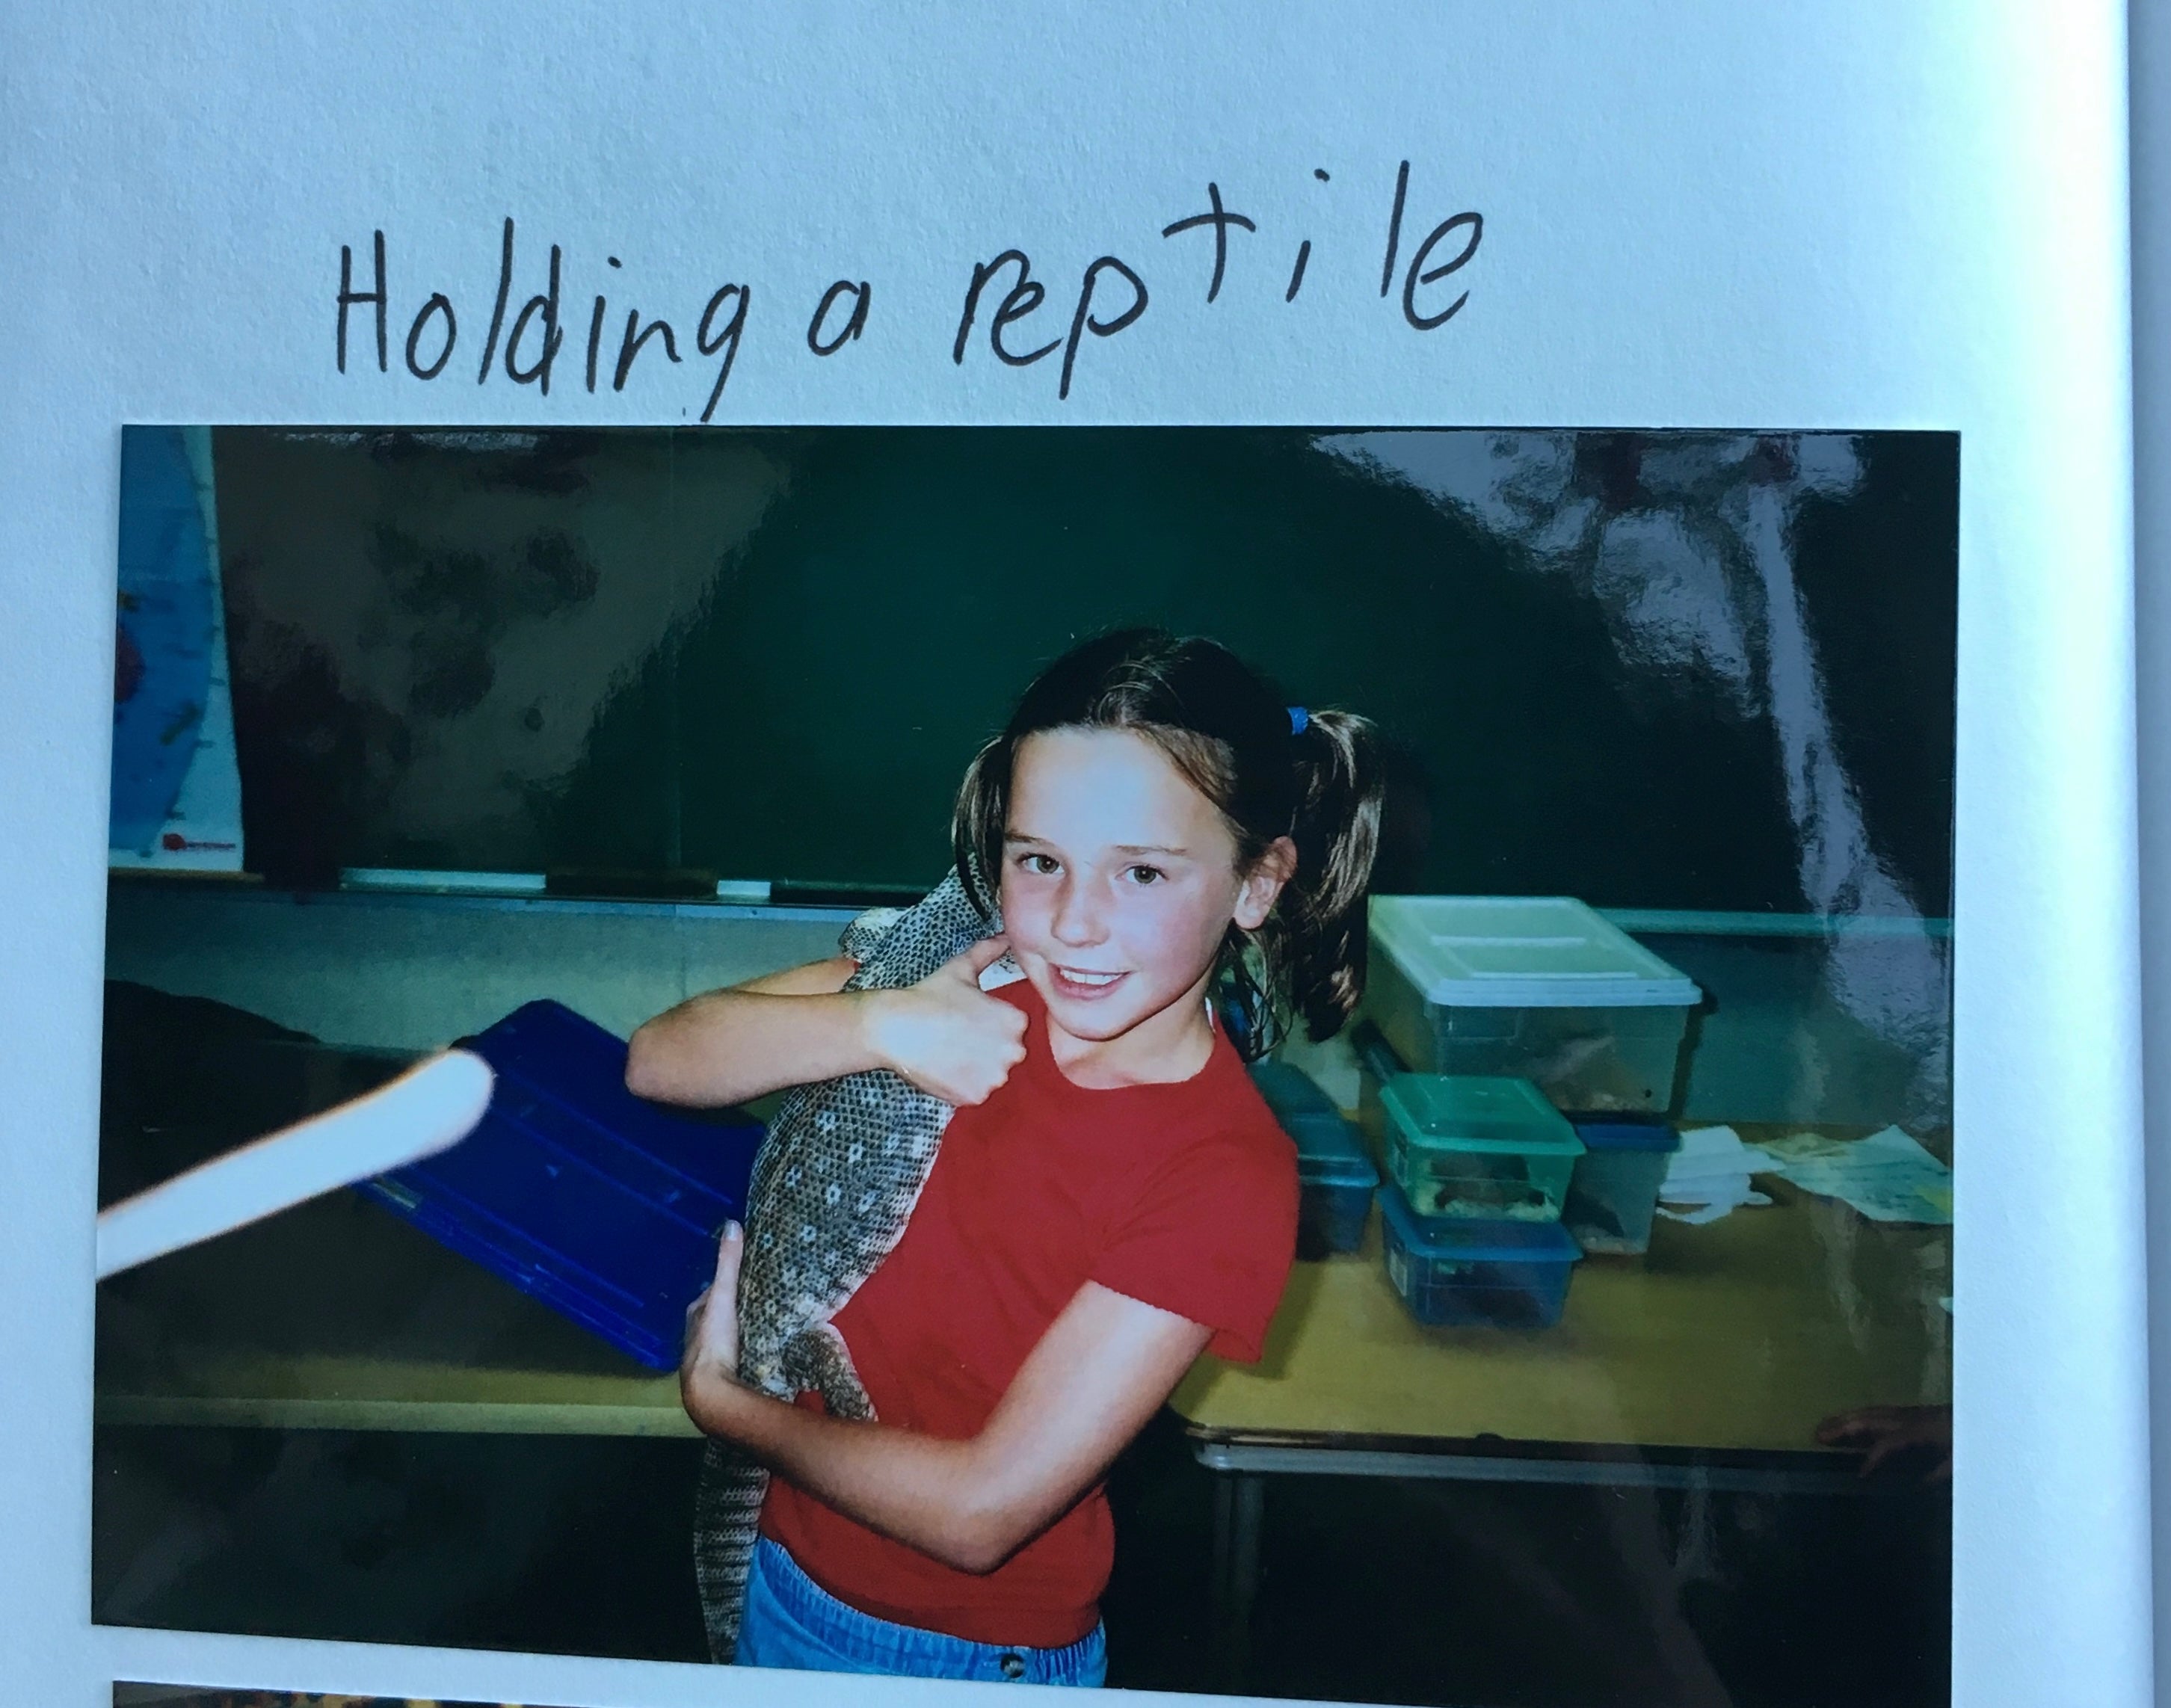 photo of a young girl holding a reptile